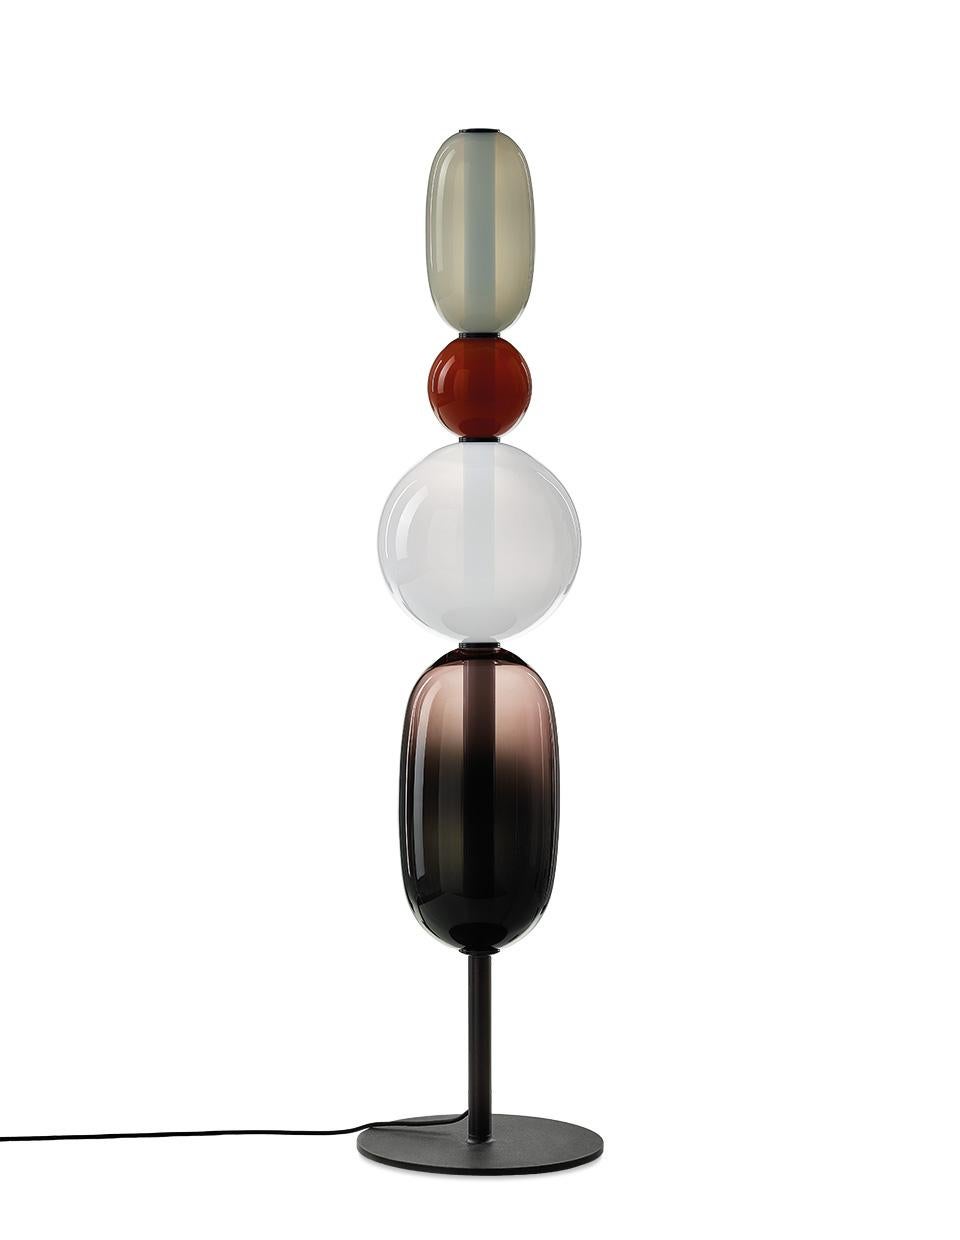 Contemporary Blown Crystal Glass Floor Lamp - Pebbles by Boris Klimek for Bomma

Pebbles are reminders of exceptional moments or favorite places. Their diverse shapes and colors inspired BOMMA’s playful collection that invites you to express your